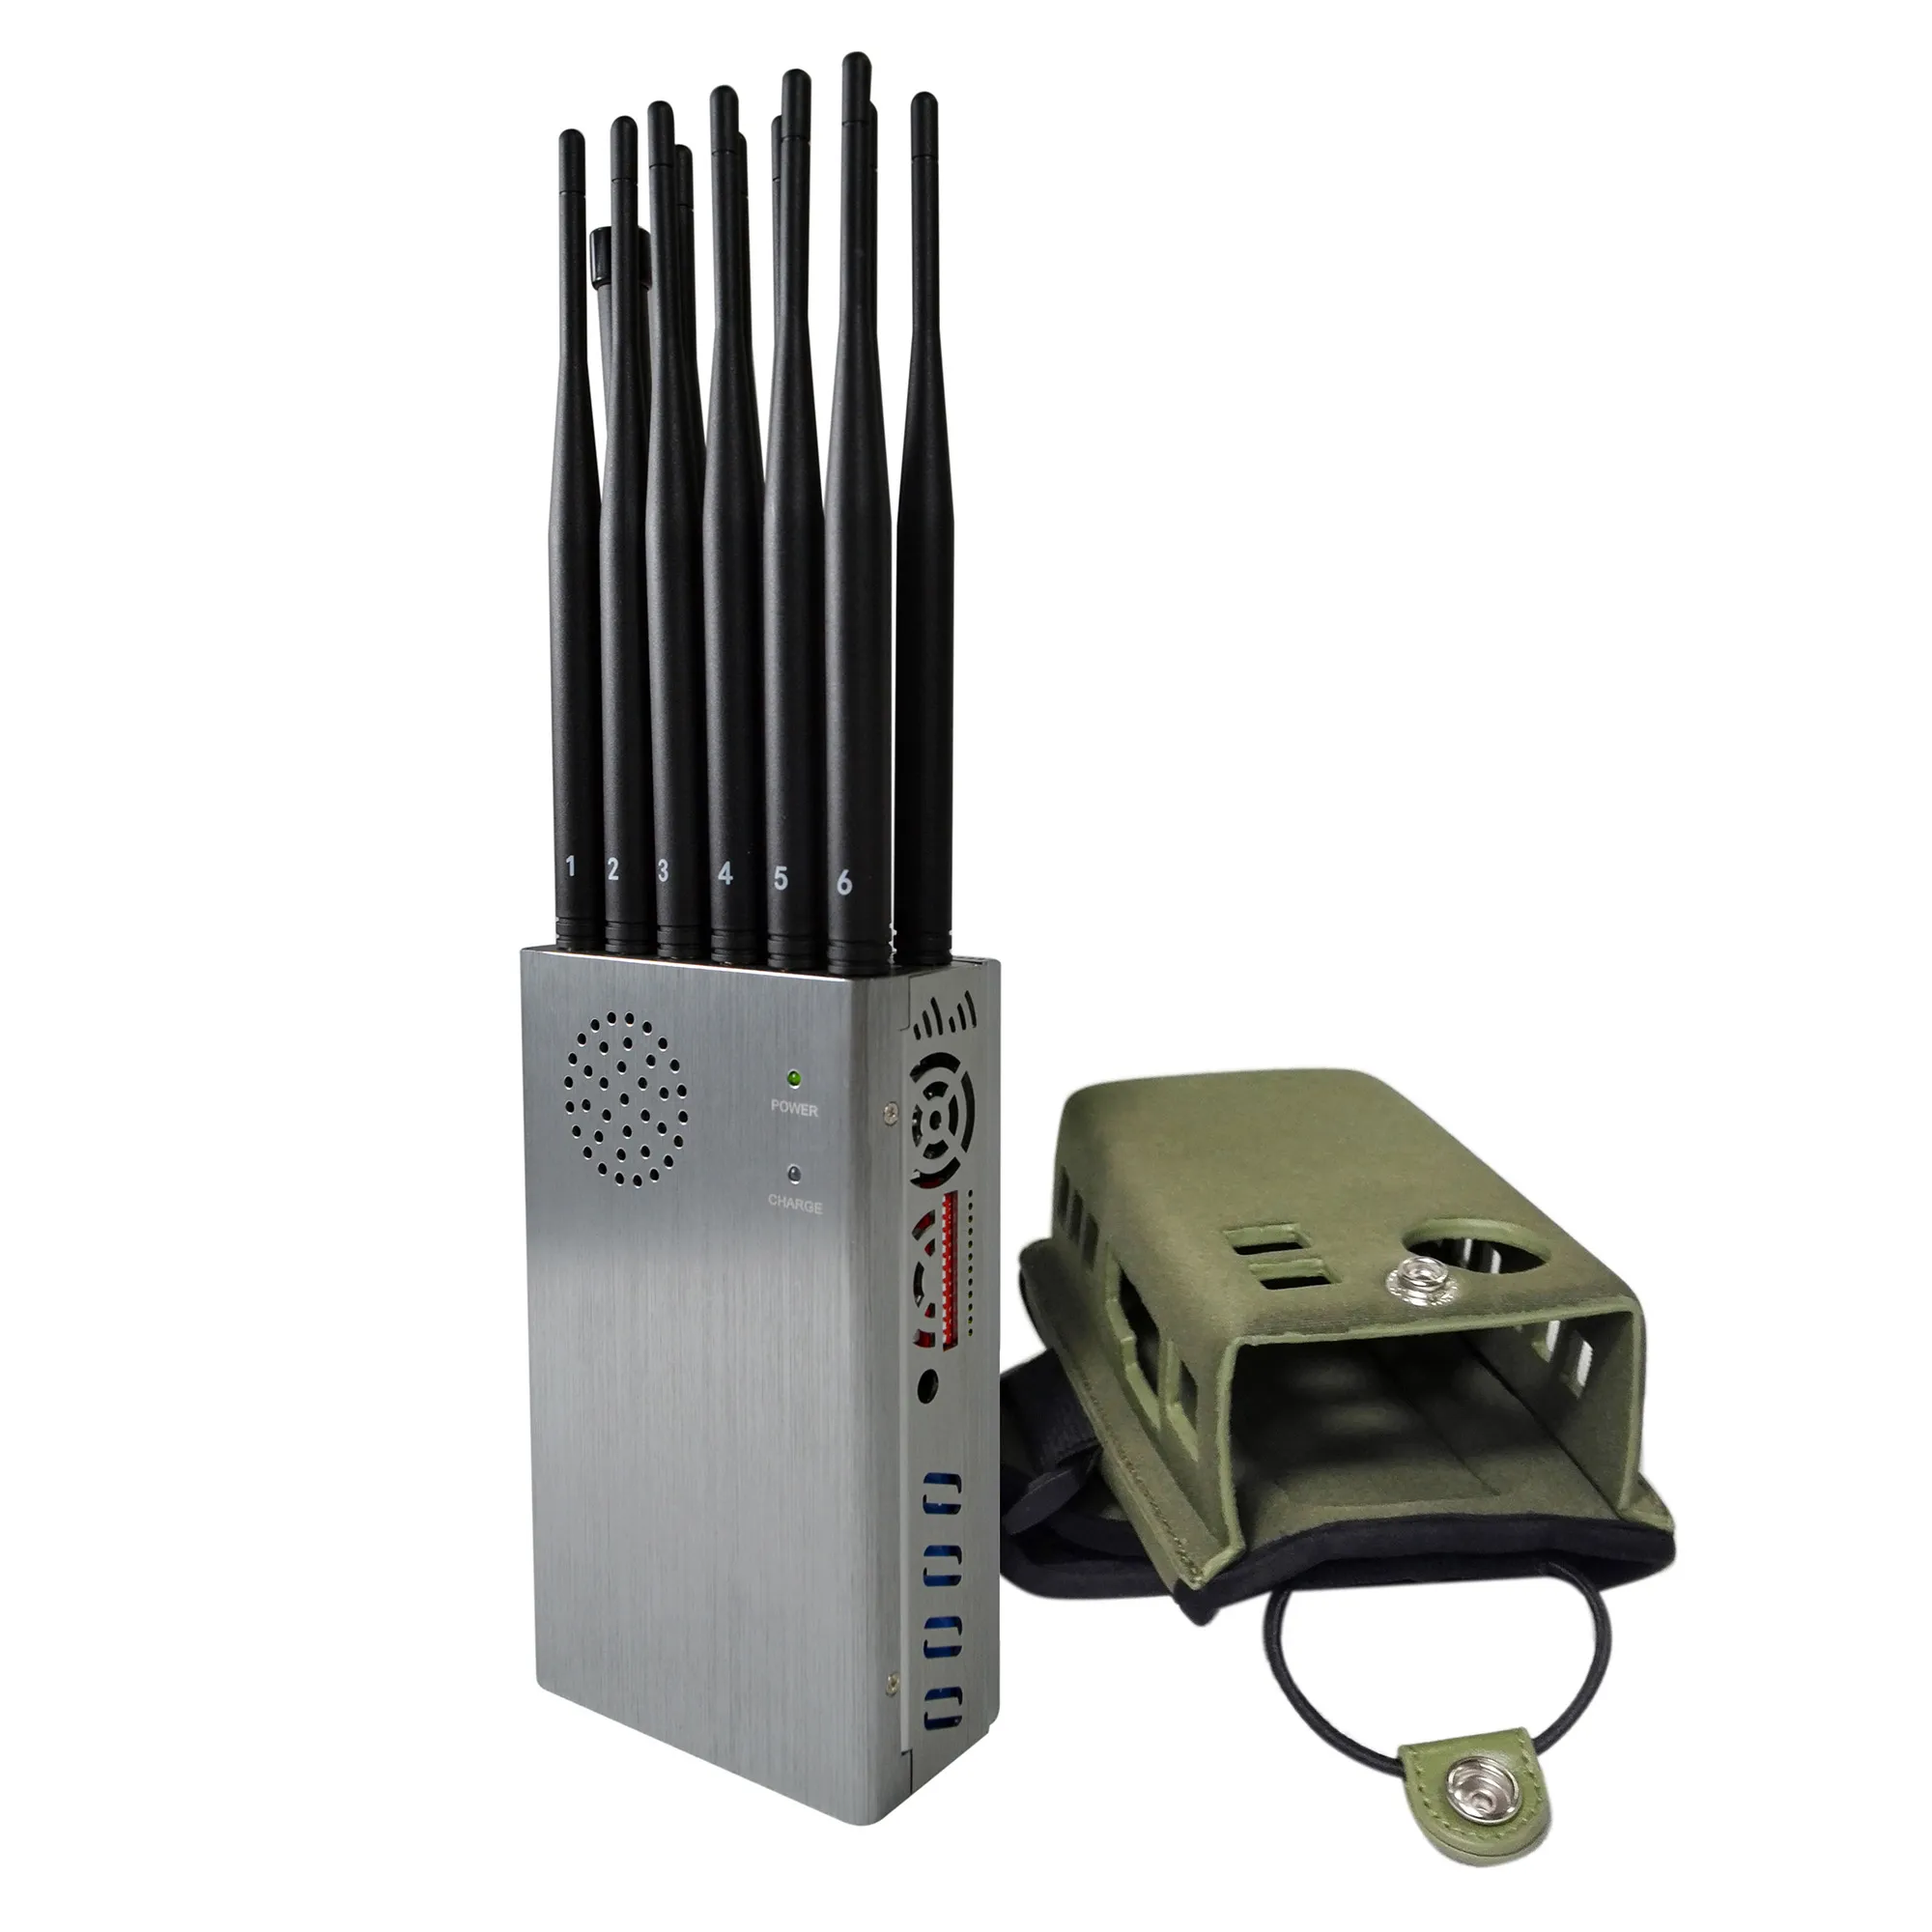 PowerPortable Mobile Phone Signal Jammer